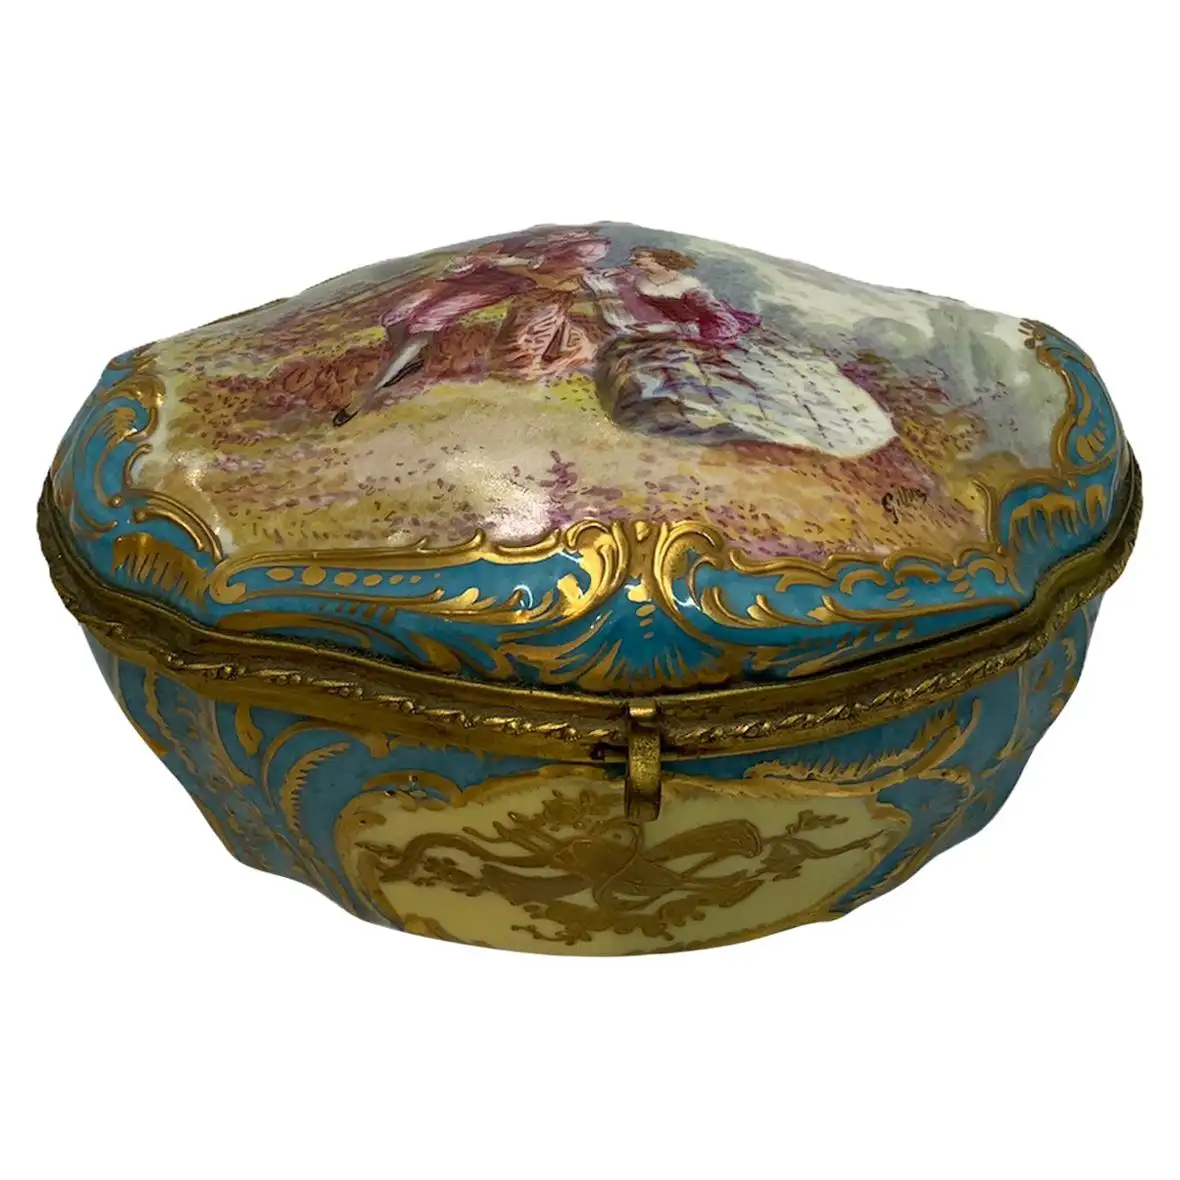 Porcelain jewelry boxes